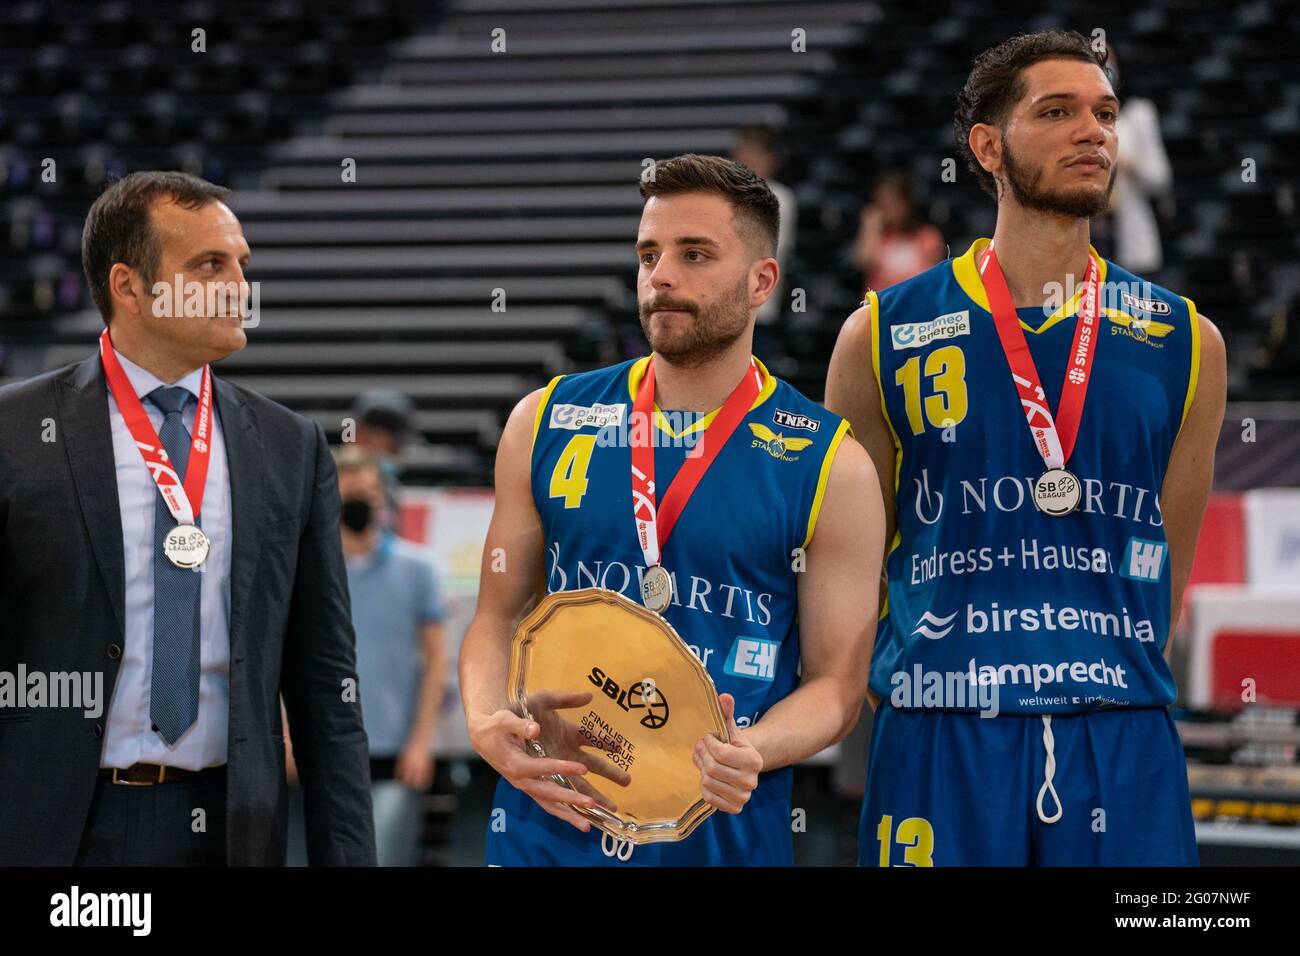 01.06.2021, Friborg, Halle St. Leonard, Final game 3: Friborg Olympic -  Starwings Basket, Starwings Basket is Vice Swiss Champion. # 4 Branislav  Kostic (Starwings Basket, center) (Photo by Til Buergy/Just Pictures/Sipa  USA